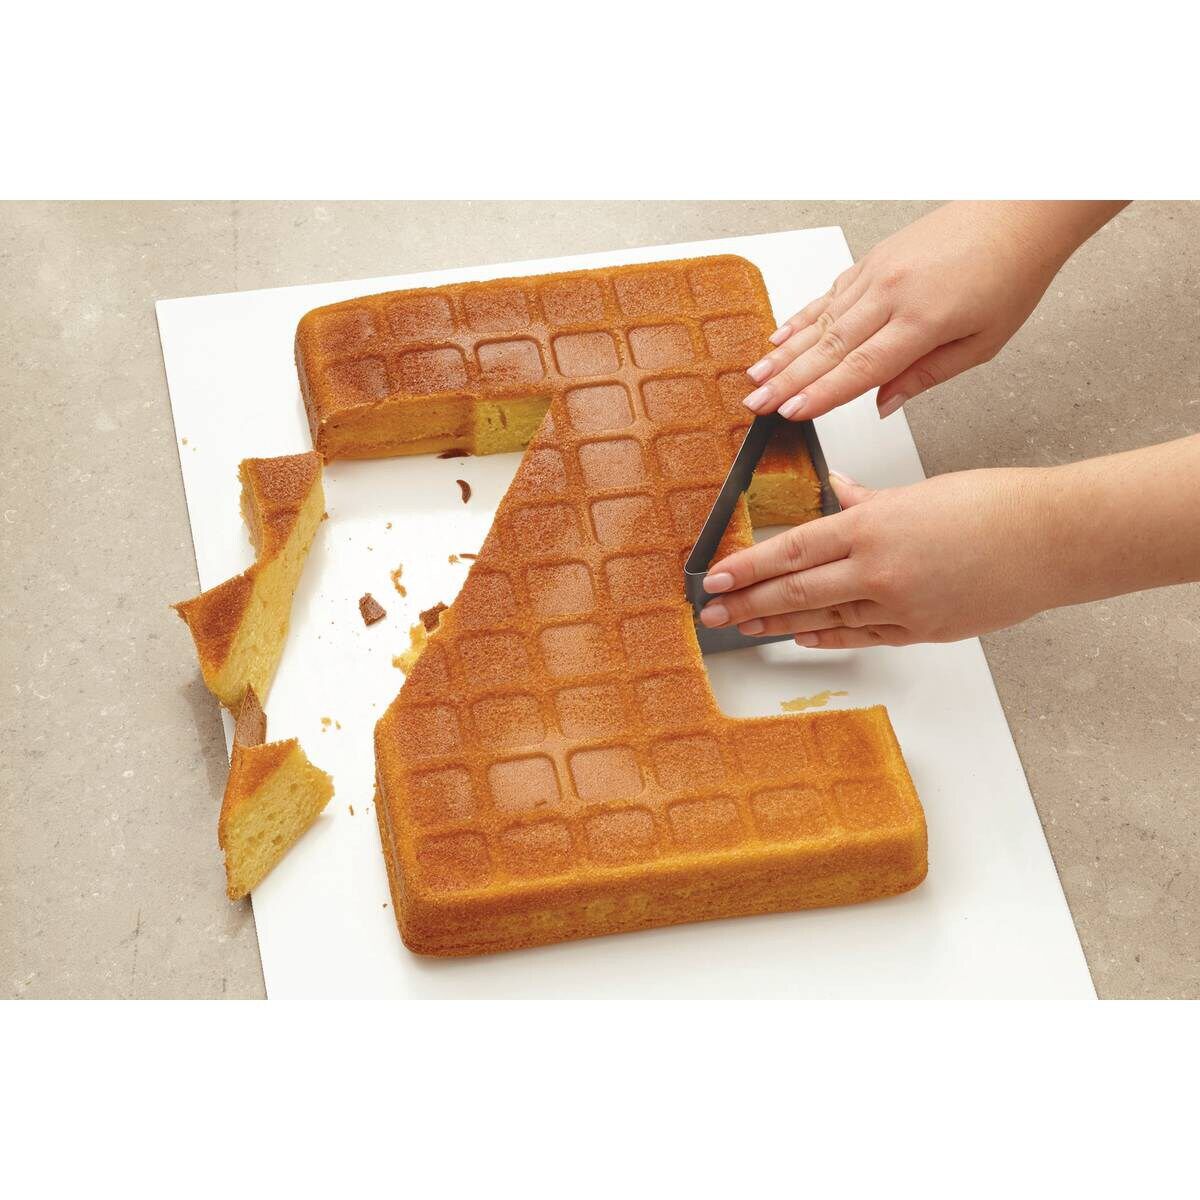 Numbers and Letters Cake Pan - Shop | Pampered Chef US Site